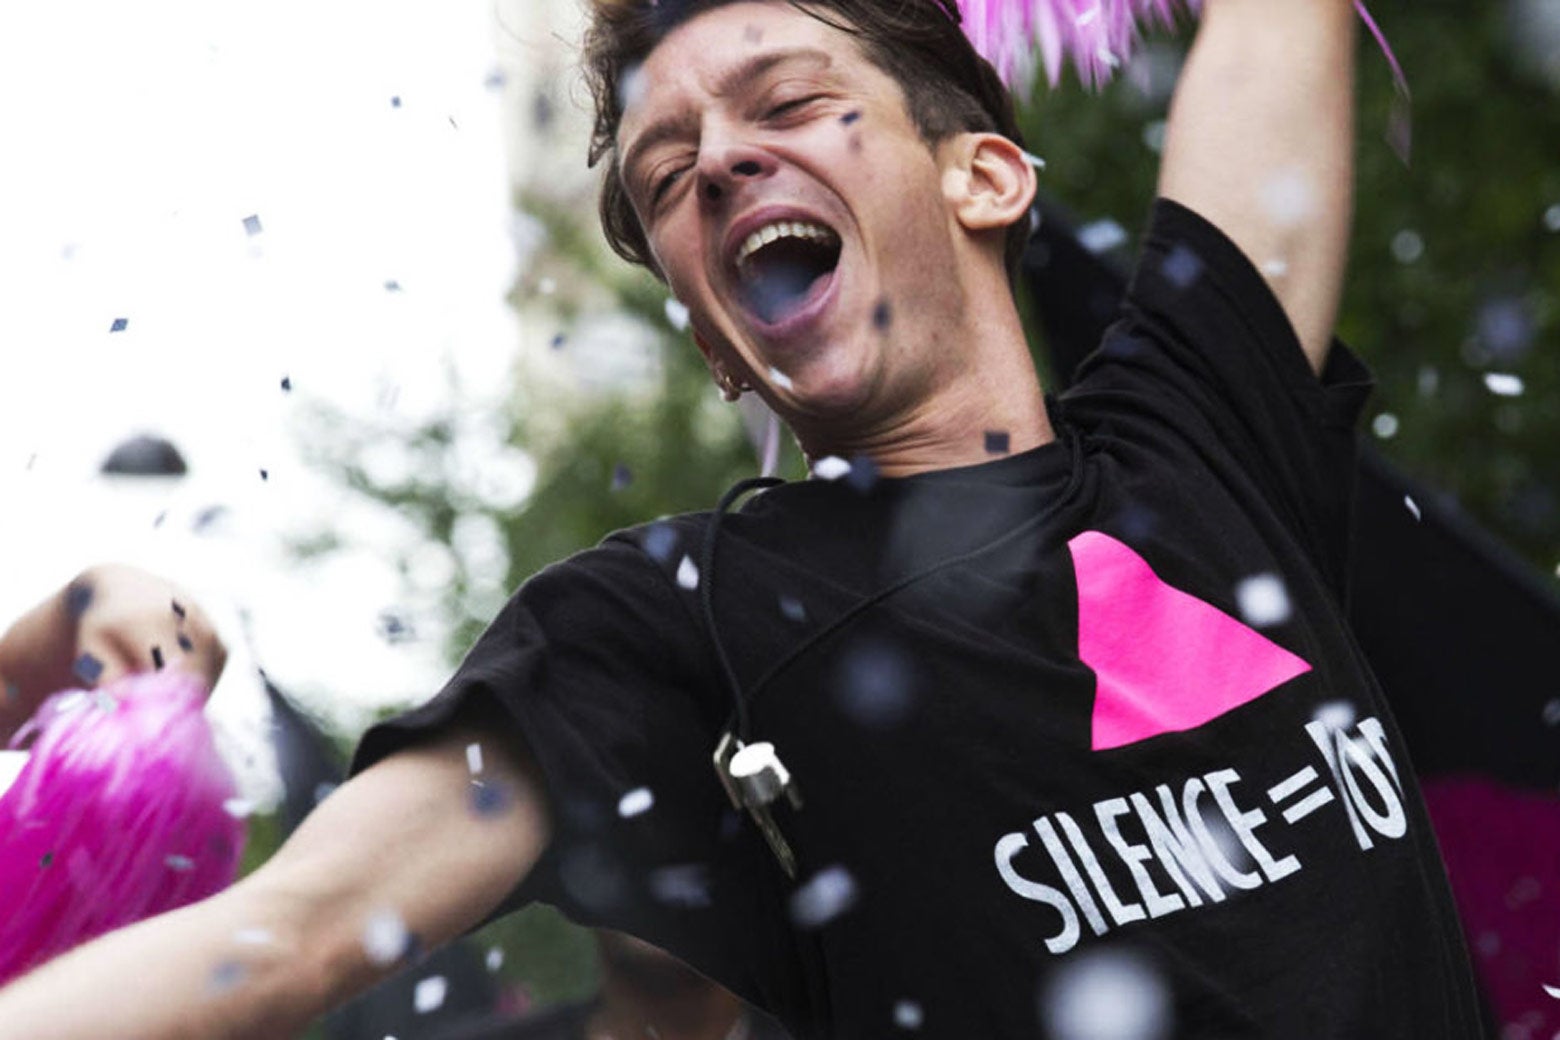 In a still from BPM (Beats per Minute), a character rejoices with pink pompoms during a parade.